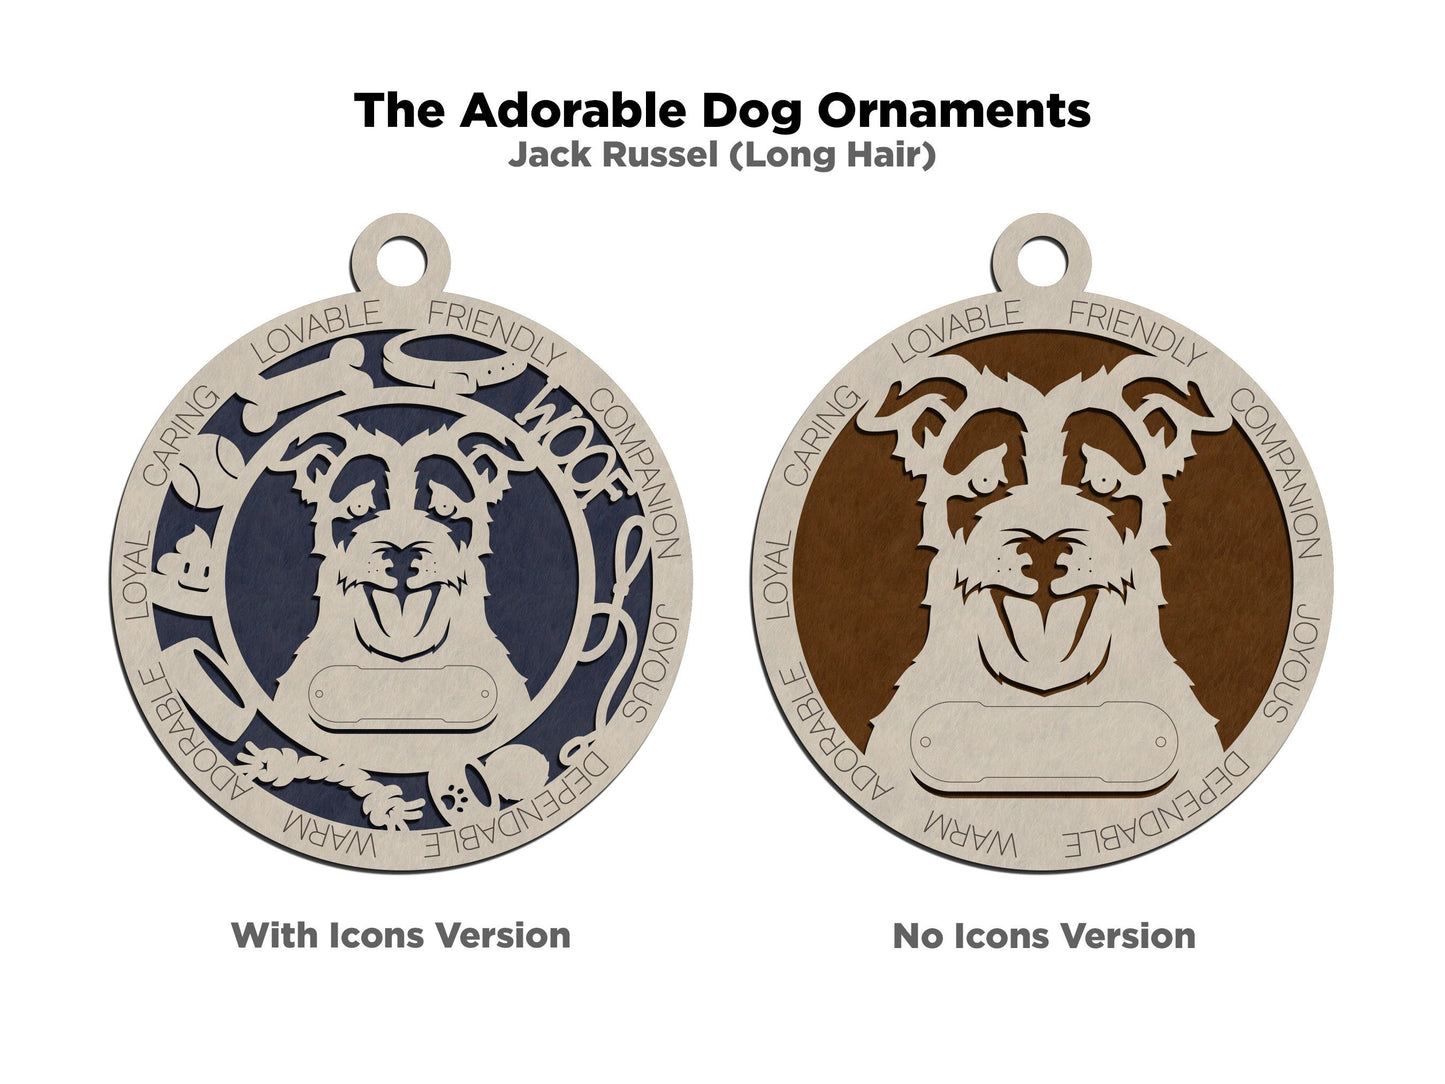 Jack Russel - Adorable Dog Ornaments - 4 Ornaments included - SVG, PDF, AI File Download - Sized for Glowforge